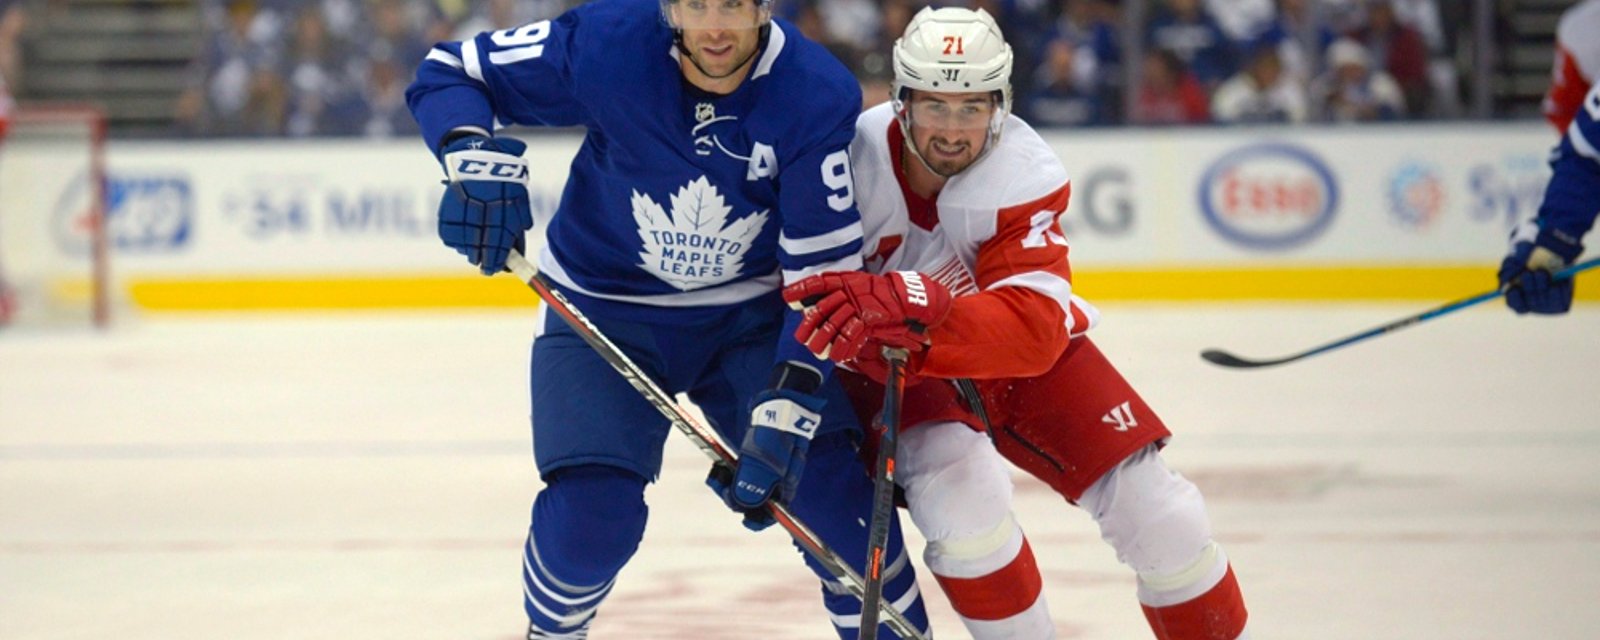 Larkin heaps praise on Tavares and Leafs’ playing style